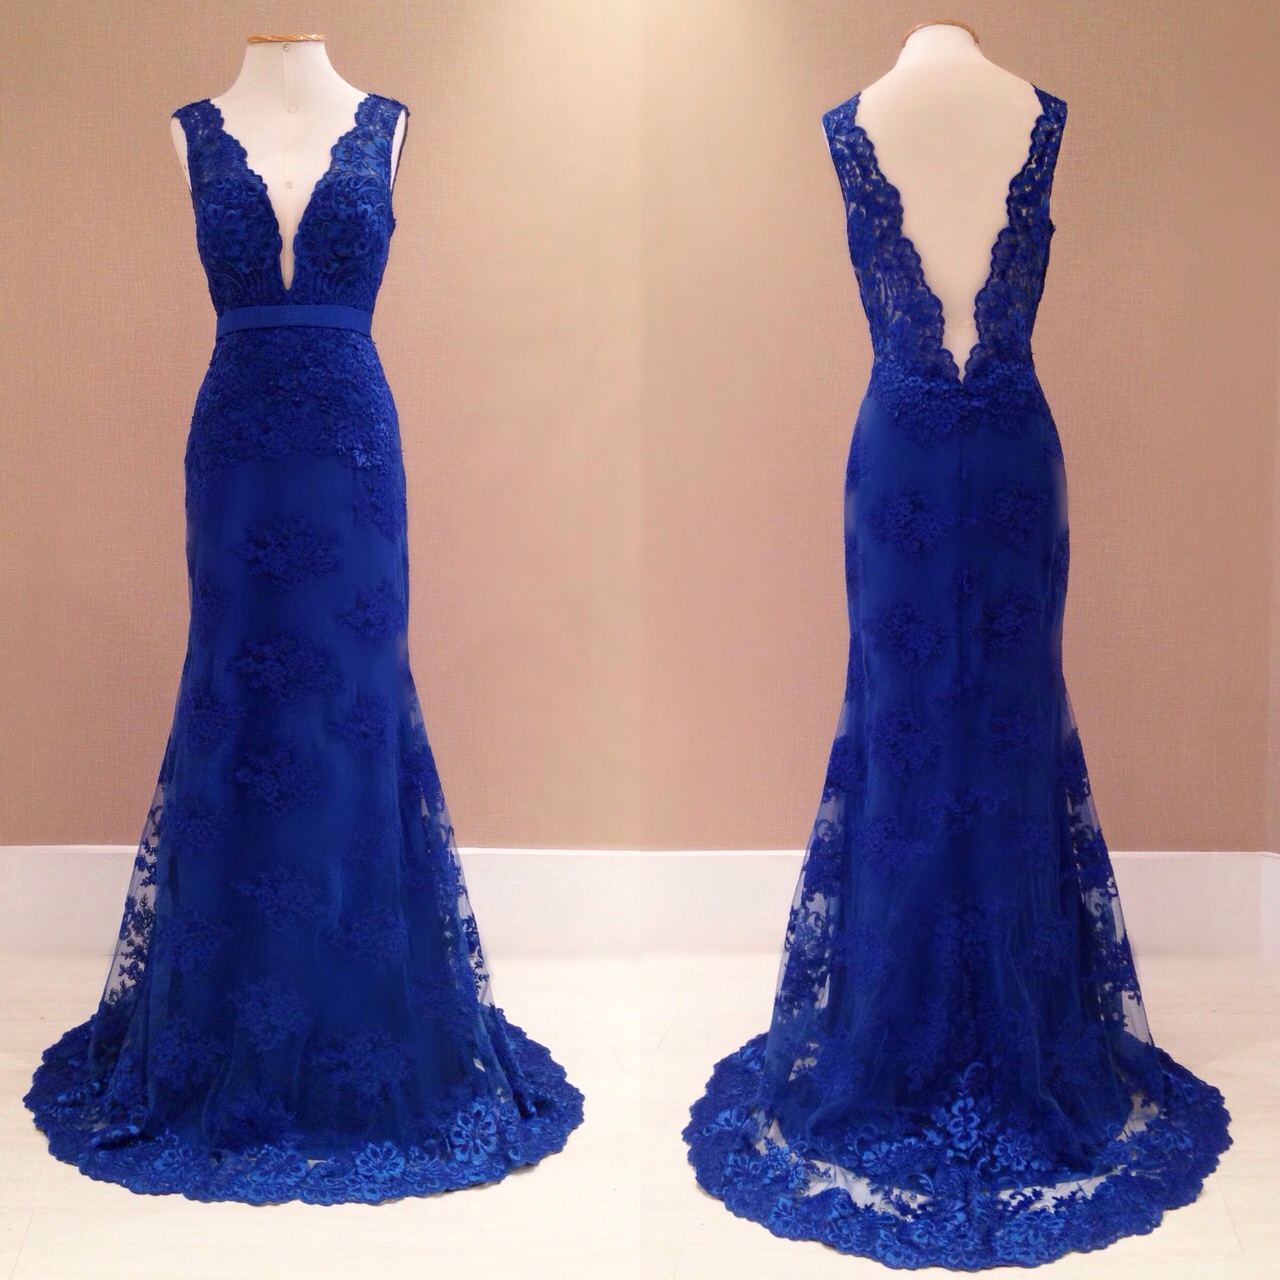 Prom Dresses,Evening Dress,Mermaid Prom Gown,Royal Blue Evening Gowns,Party Dresses,Mermaid Evening Gowns,Sexy Formal Dress For Teens